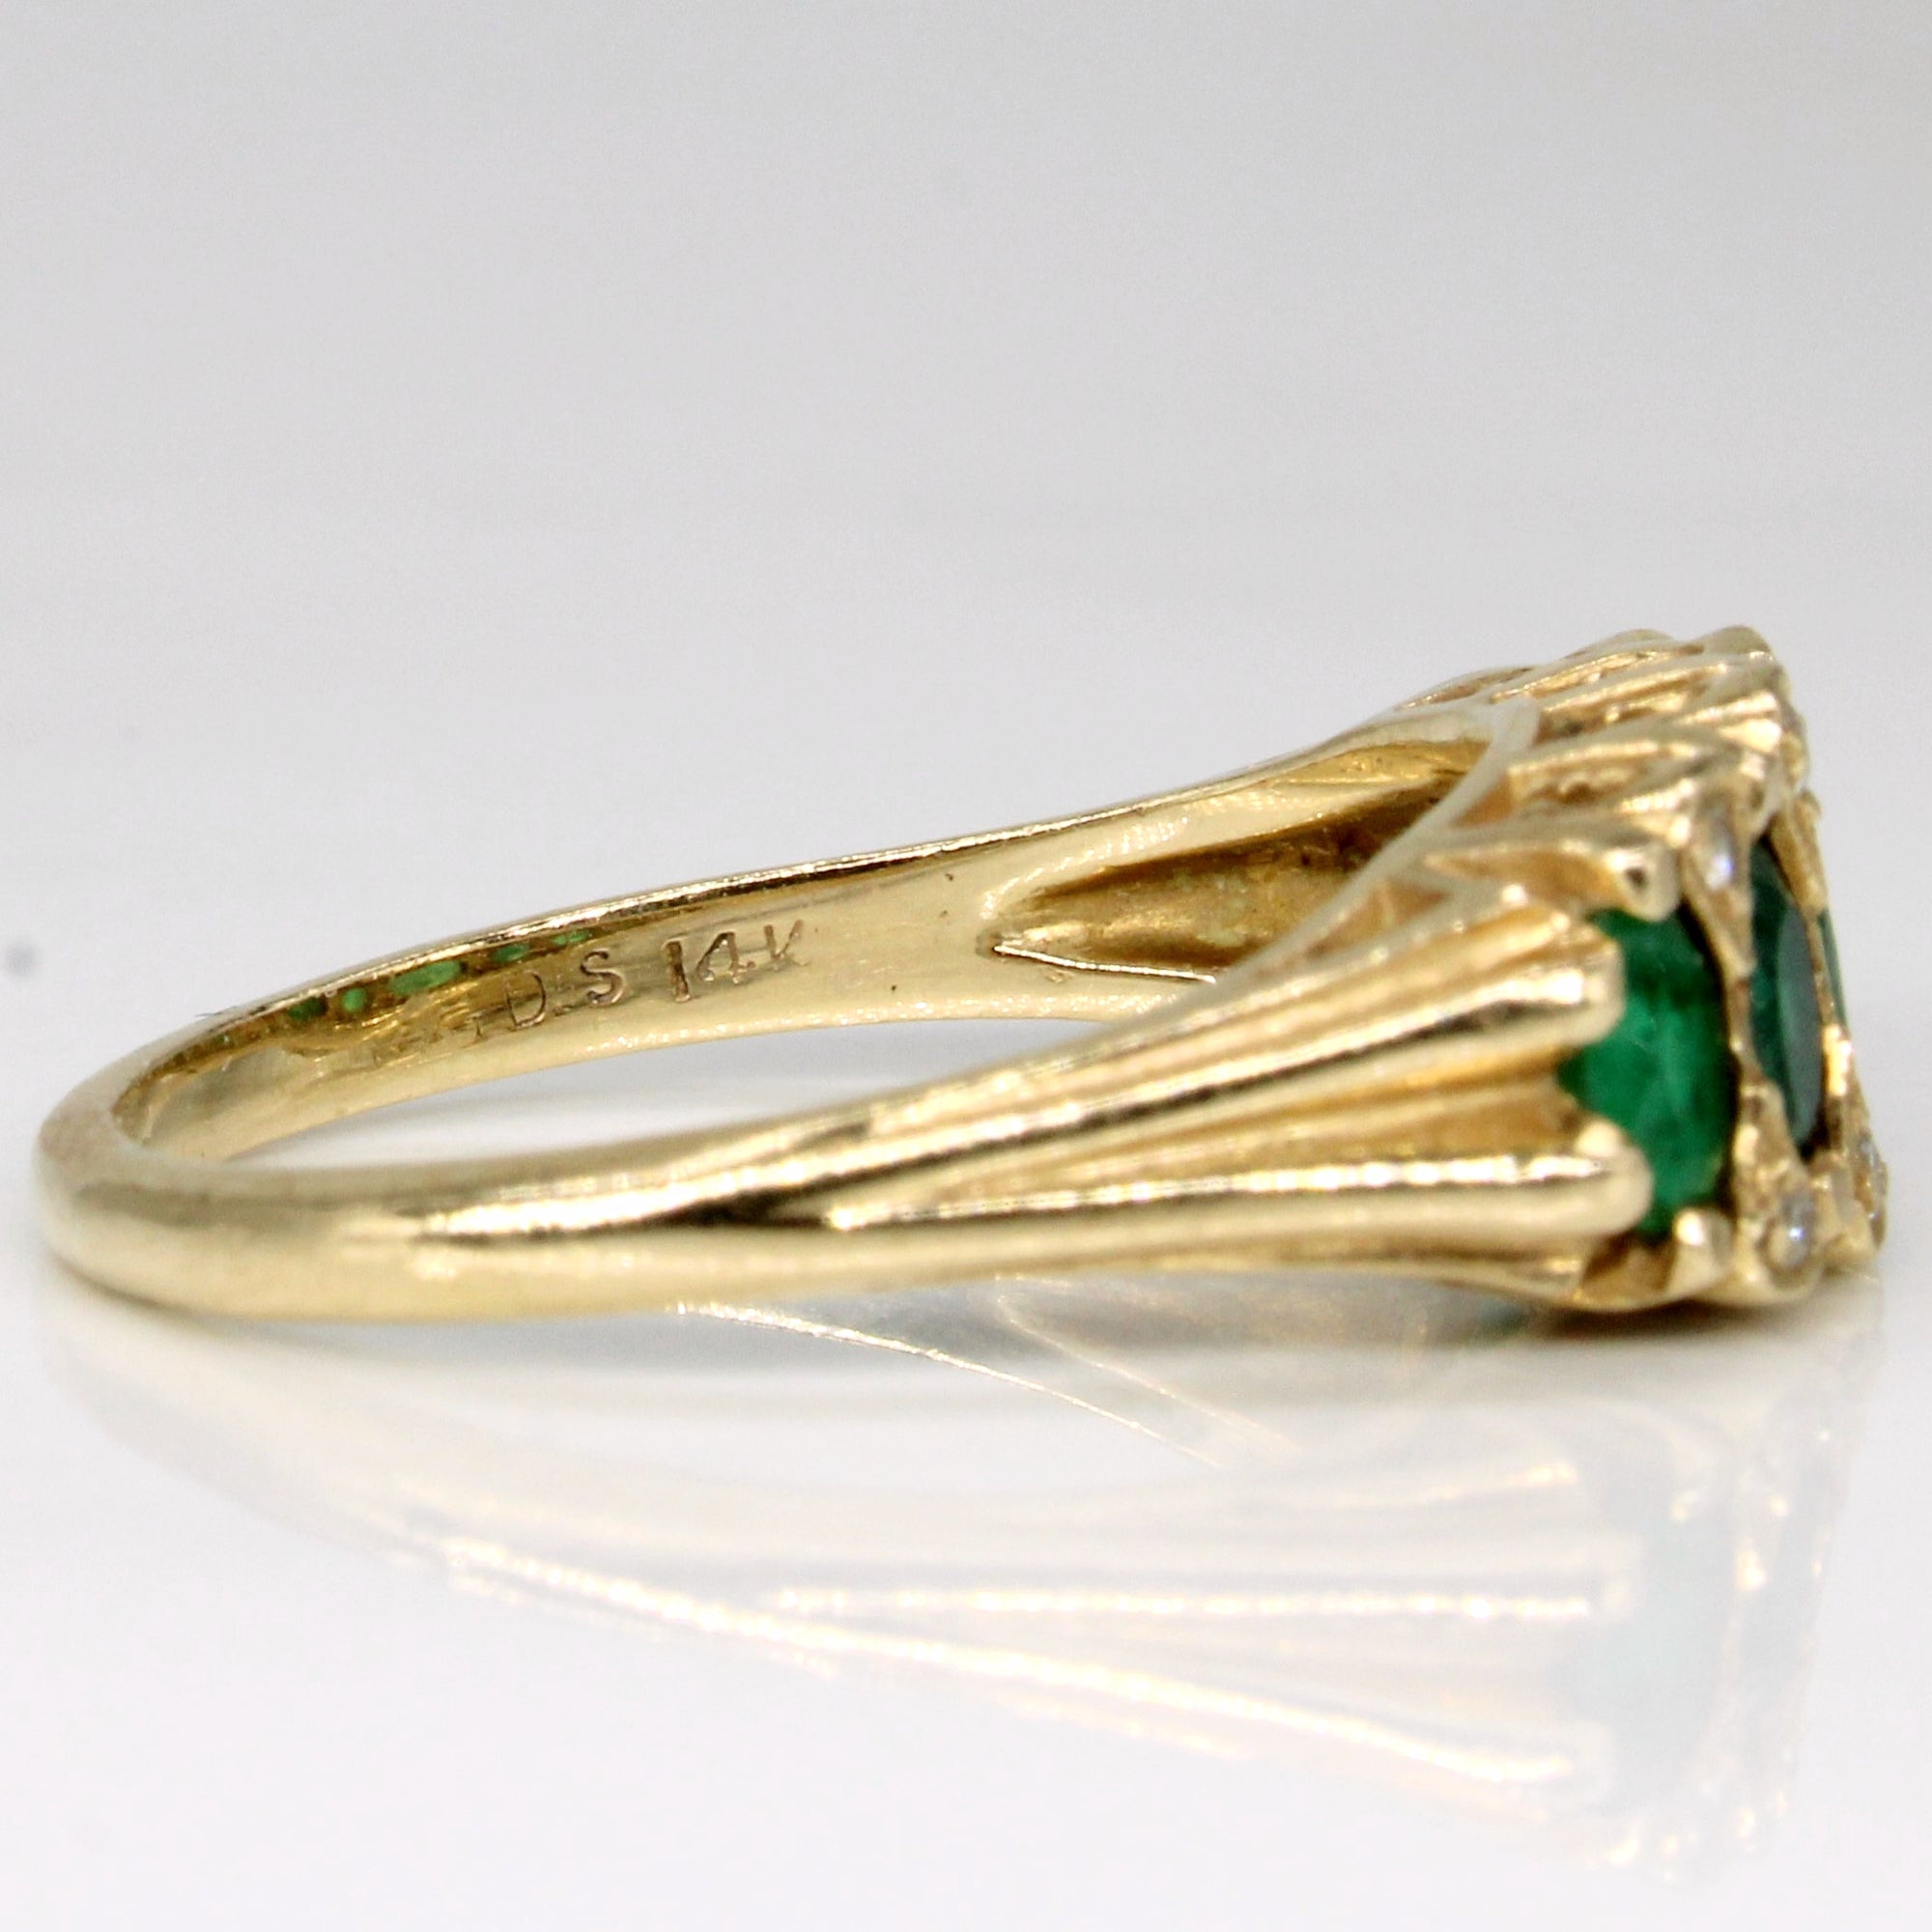 14k Yellow Gold Oval Emerald and Diamond Ring | 0.81ctw | SZ 8.5